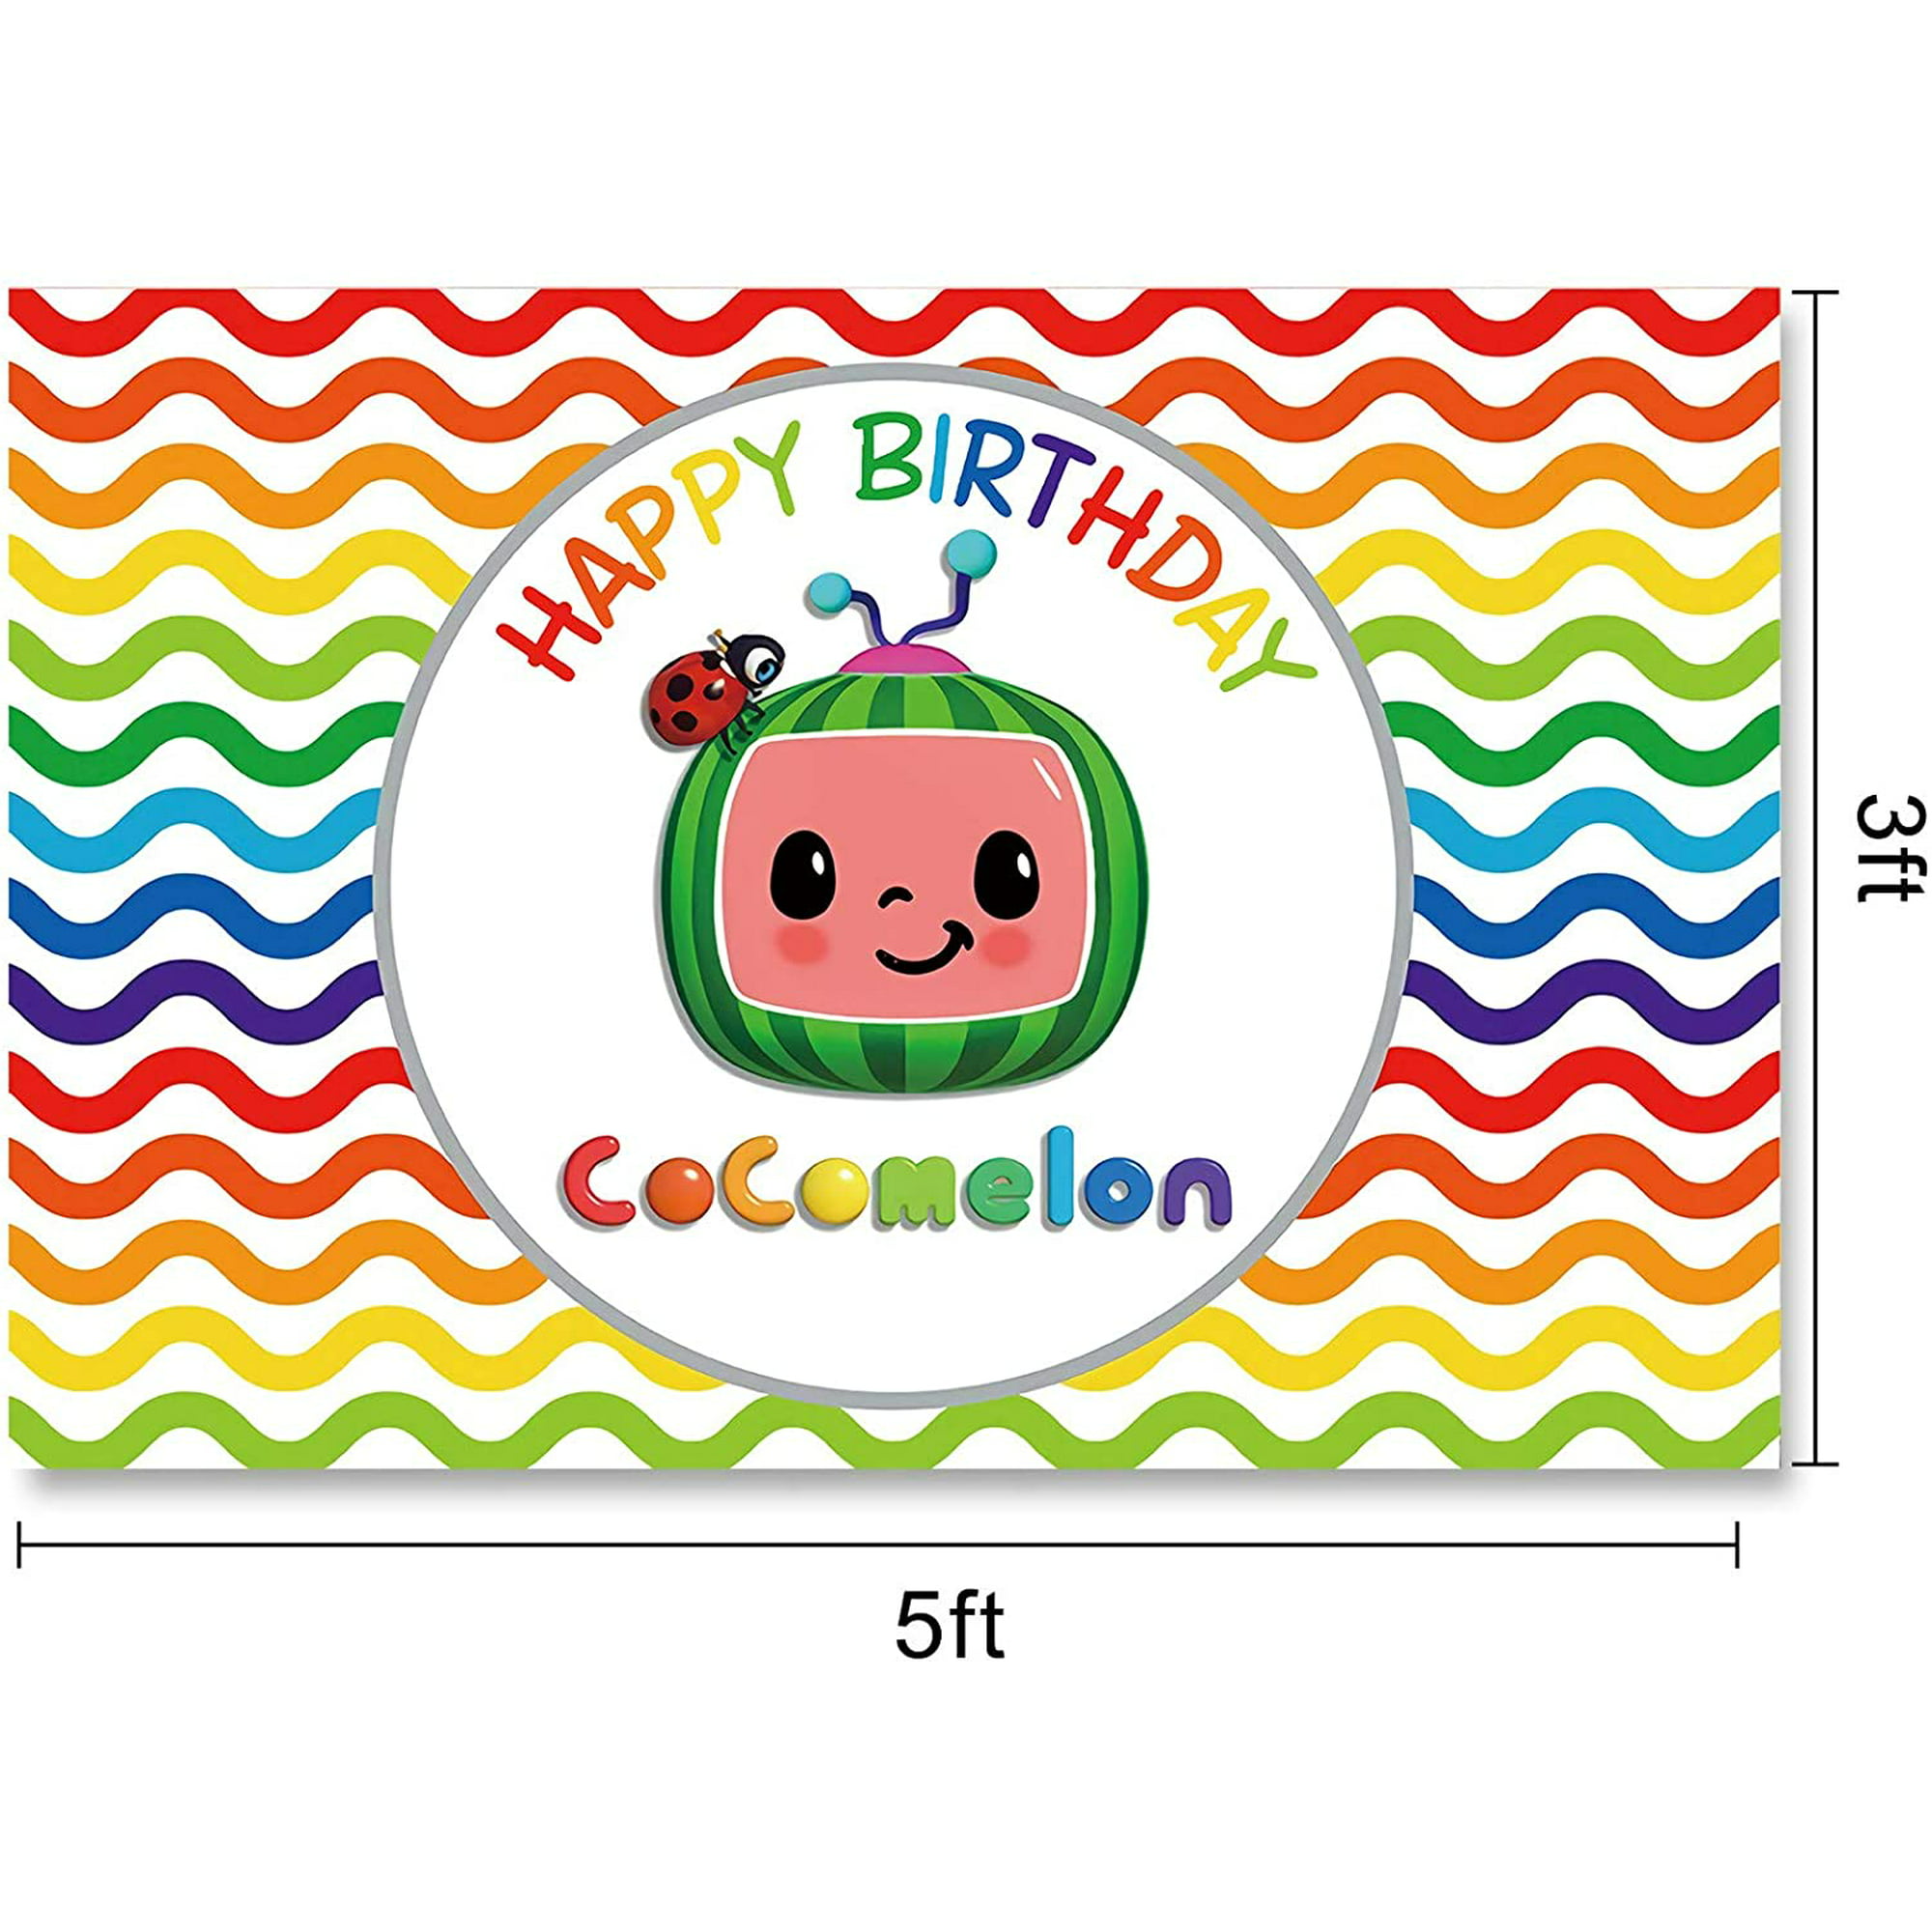 Cartoon Cocomelon Backdrop Lovely Watermelon Colorful Background Theme  Happy Birthday Party Banner Decorations Supplies | Walmart Canada